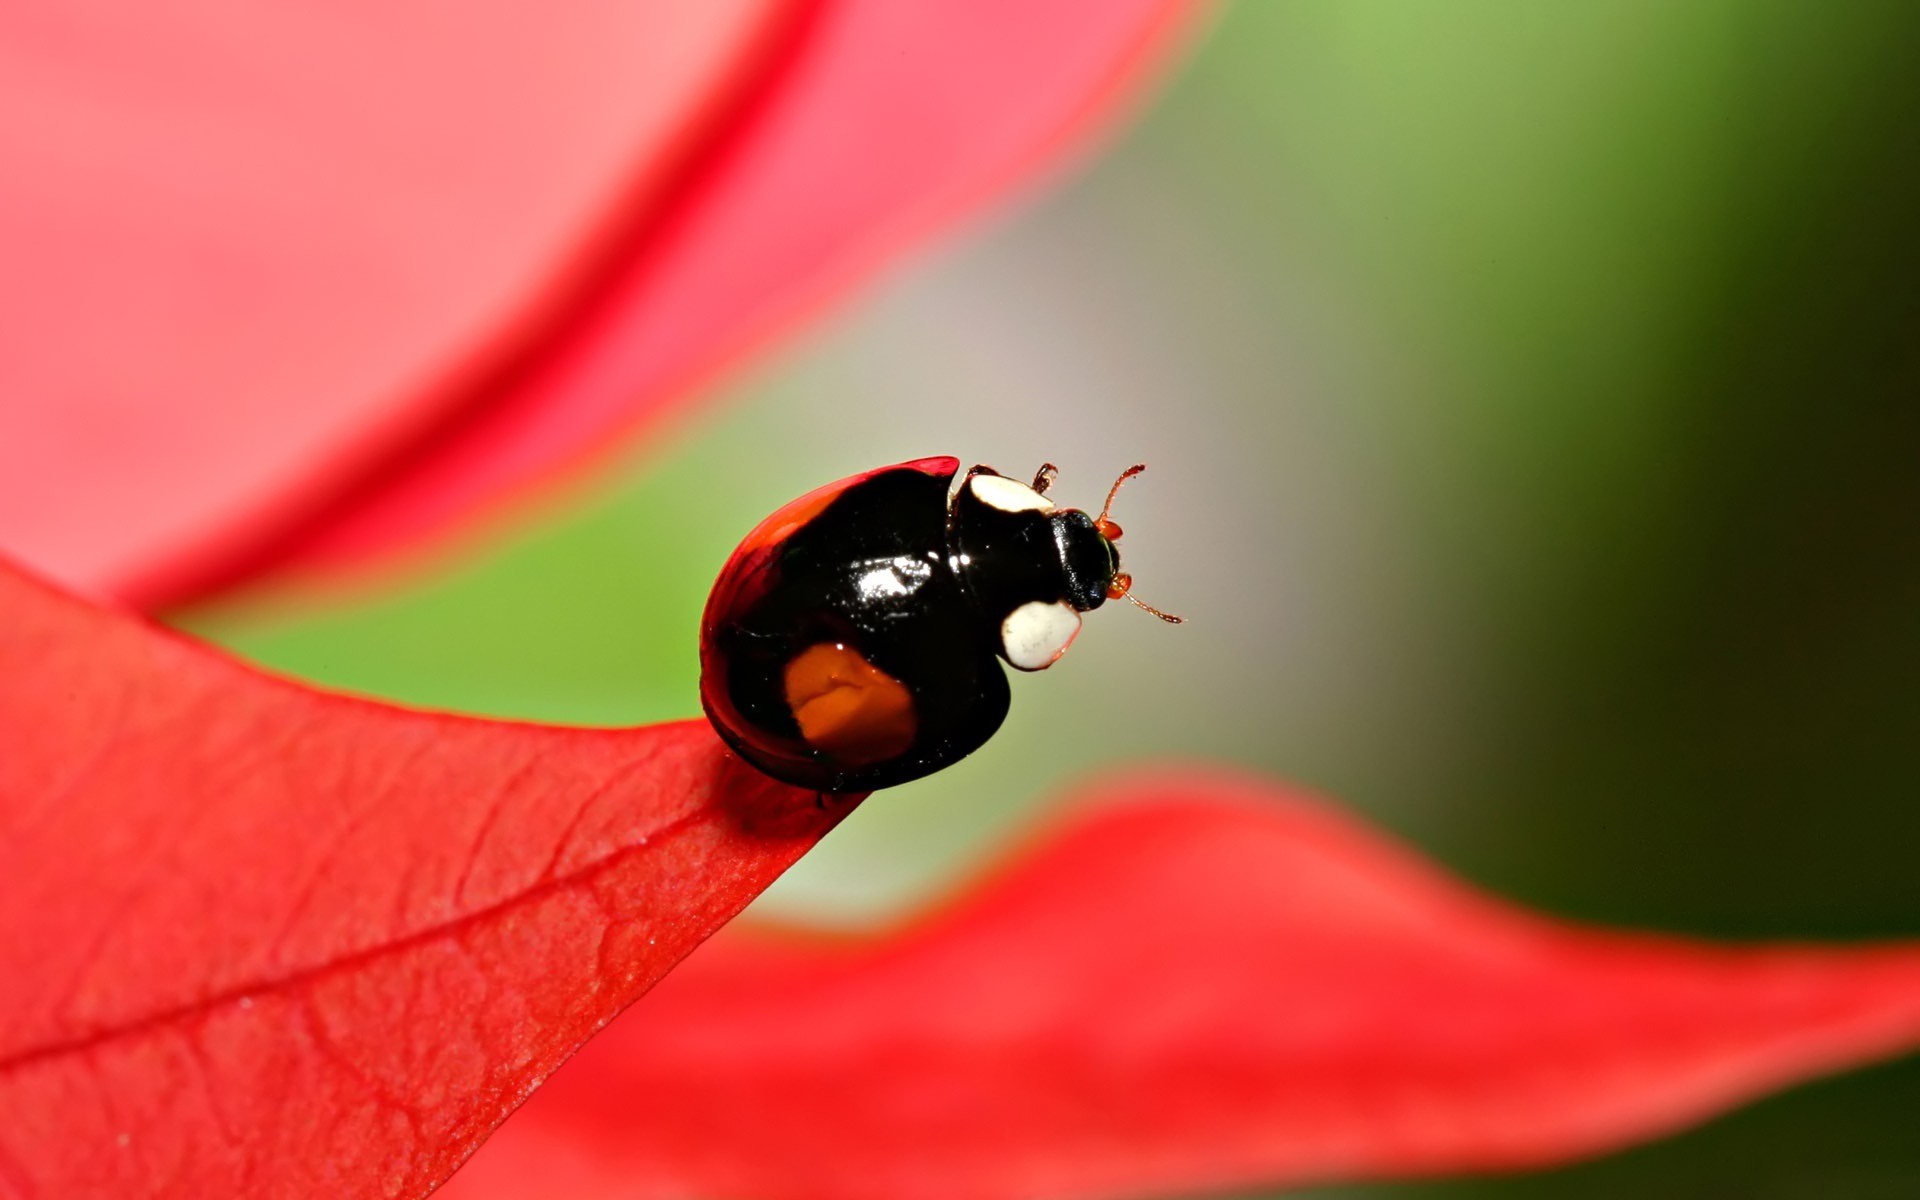 Vibrant ladybug perched on a green leaf - delightful nature close-up wallpaper.